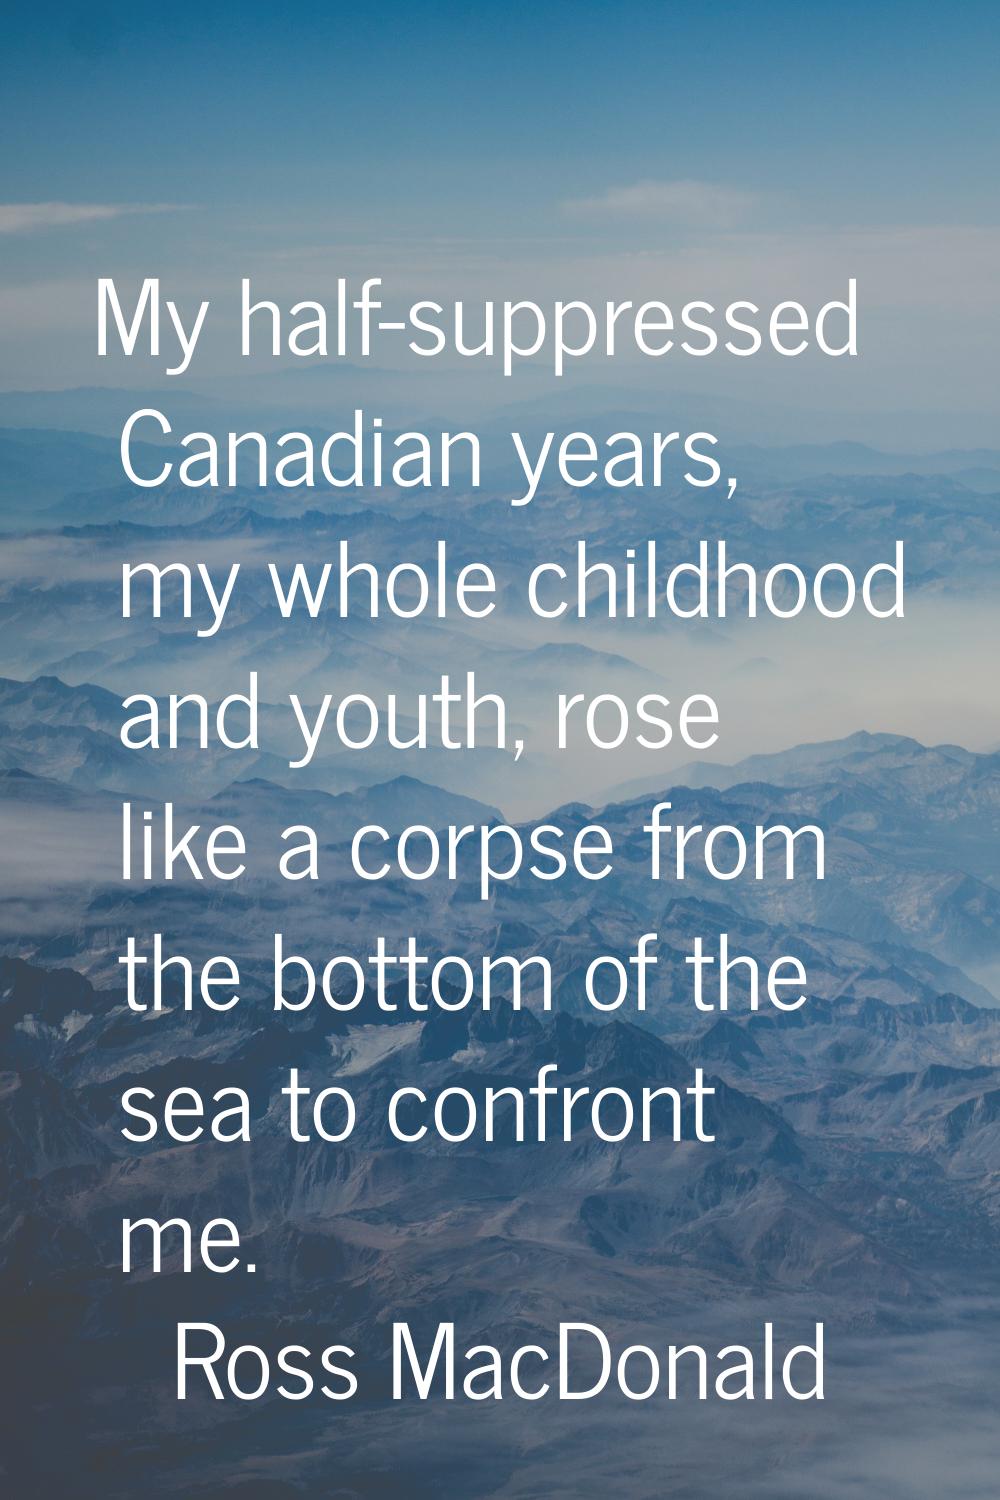 My half-suppressed Canadian years, my whole childhood and youth, rose like a corpse from the bottom